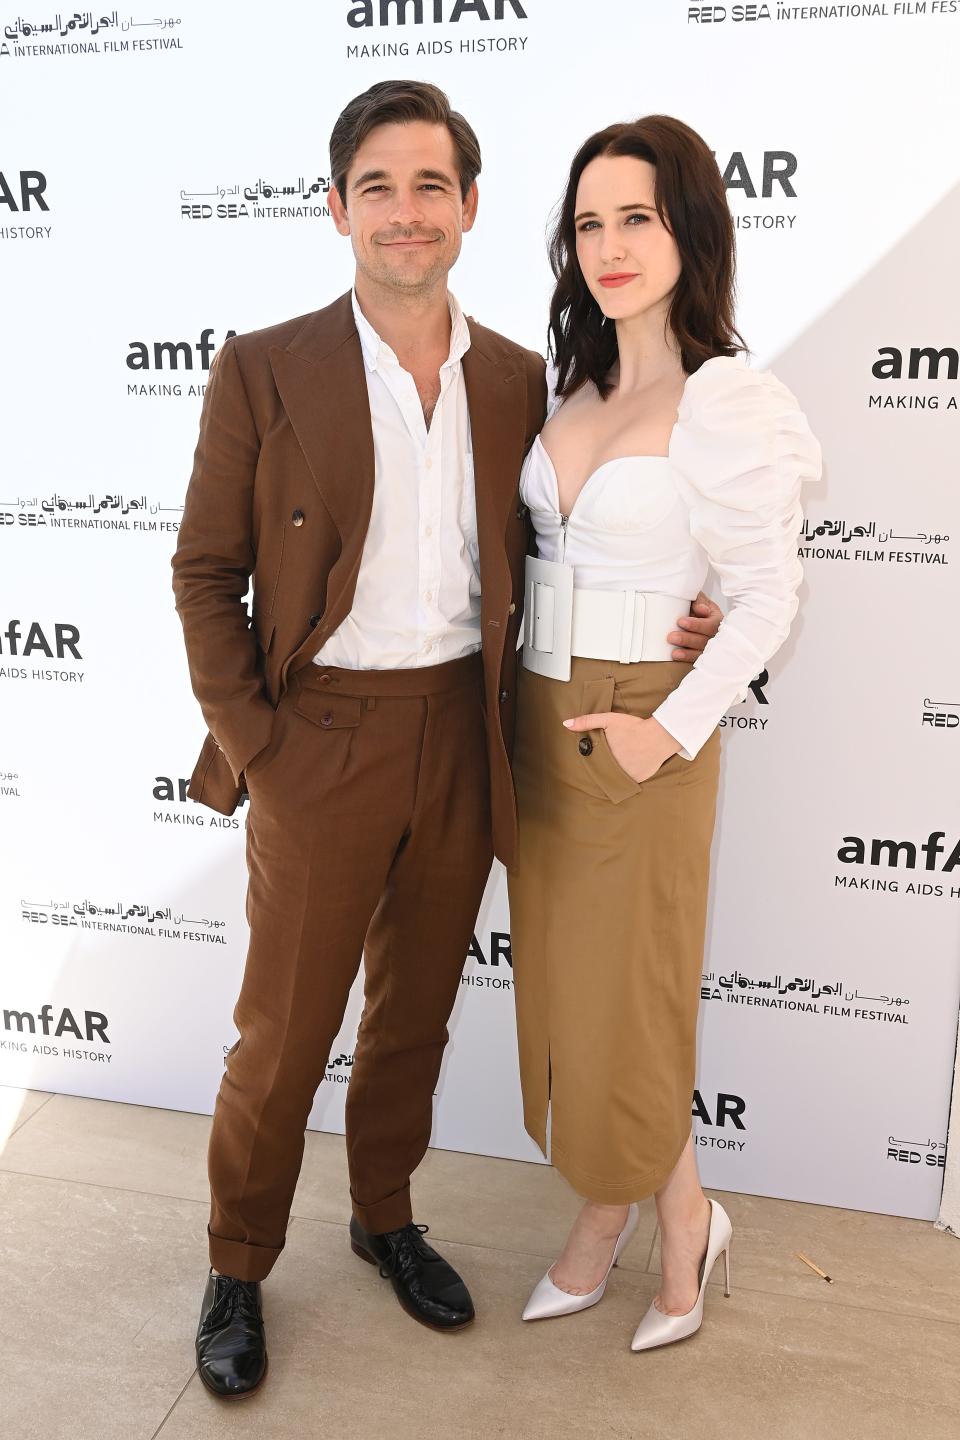 Jason Ralph and Rachel Brosnahan attend celebration of Cinema, Pre-amfAR gala lunch hosted by the Red Sea International Film Festival during the 74th annual Cannes Film Festival on July 15, 2021 in Antibes, France.